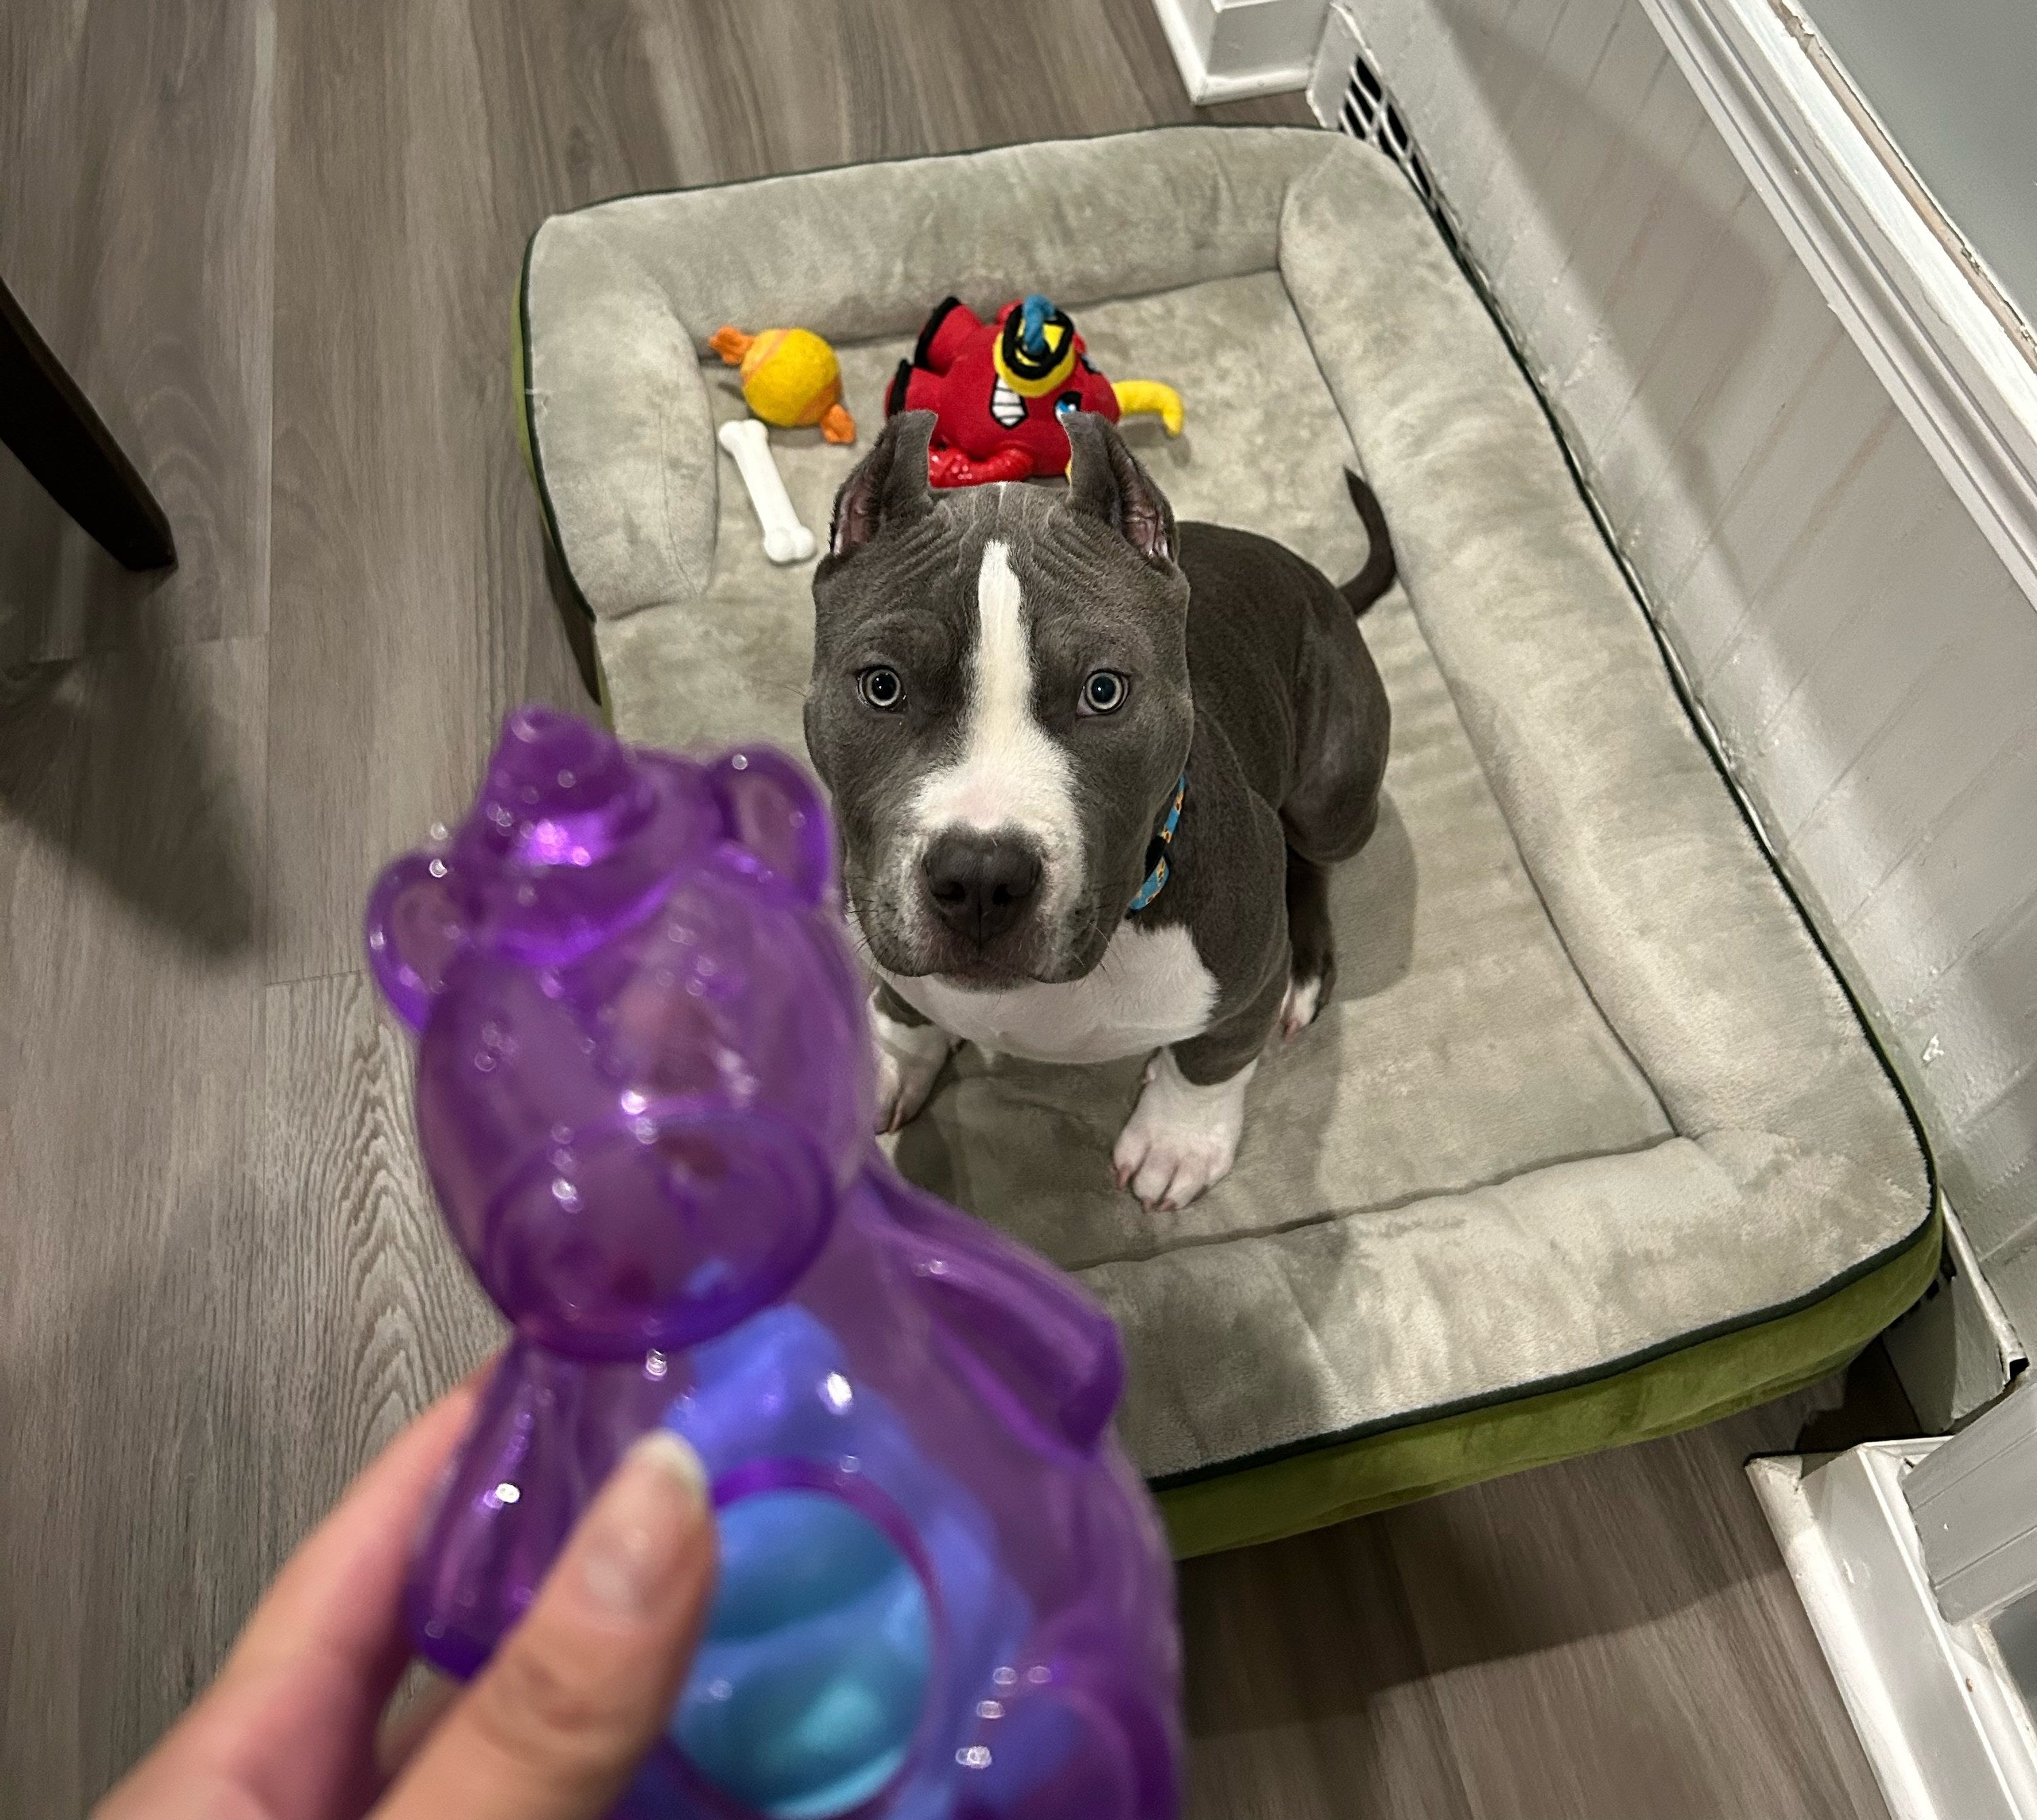 A dog looking at a unicorn-shaped toy while the writer is holding it